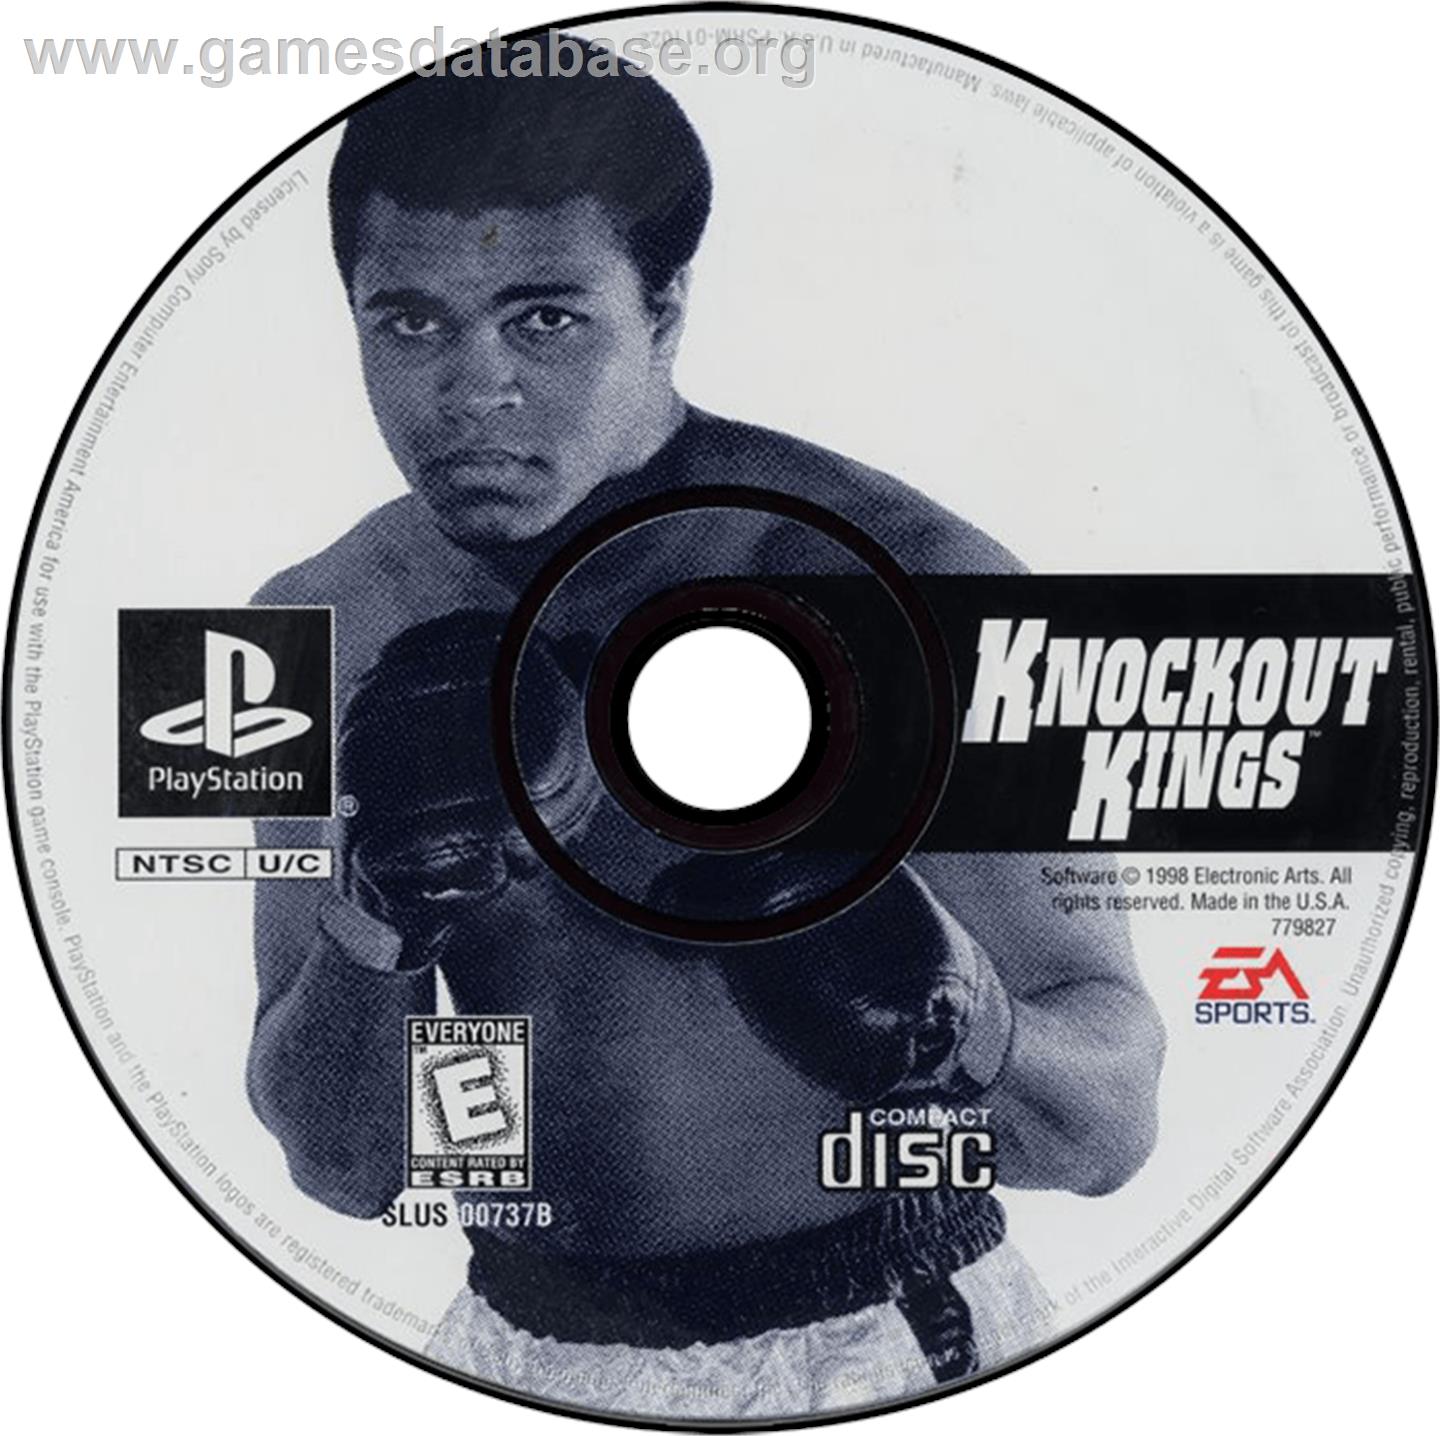 Knockout Kings - Sony Playstation - Artwork - Disc